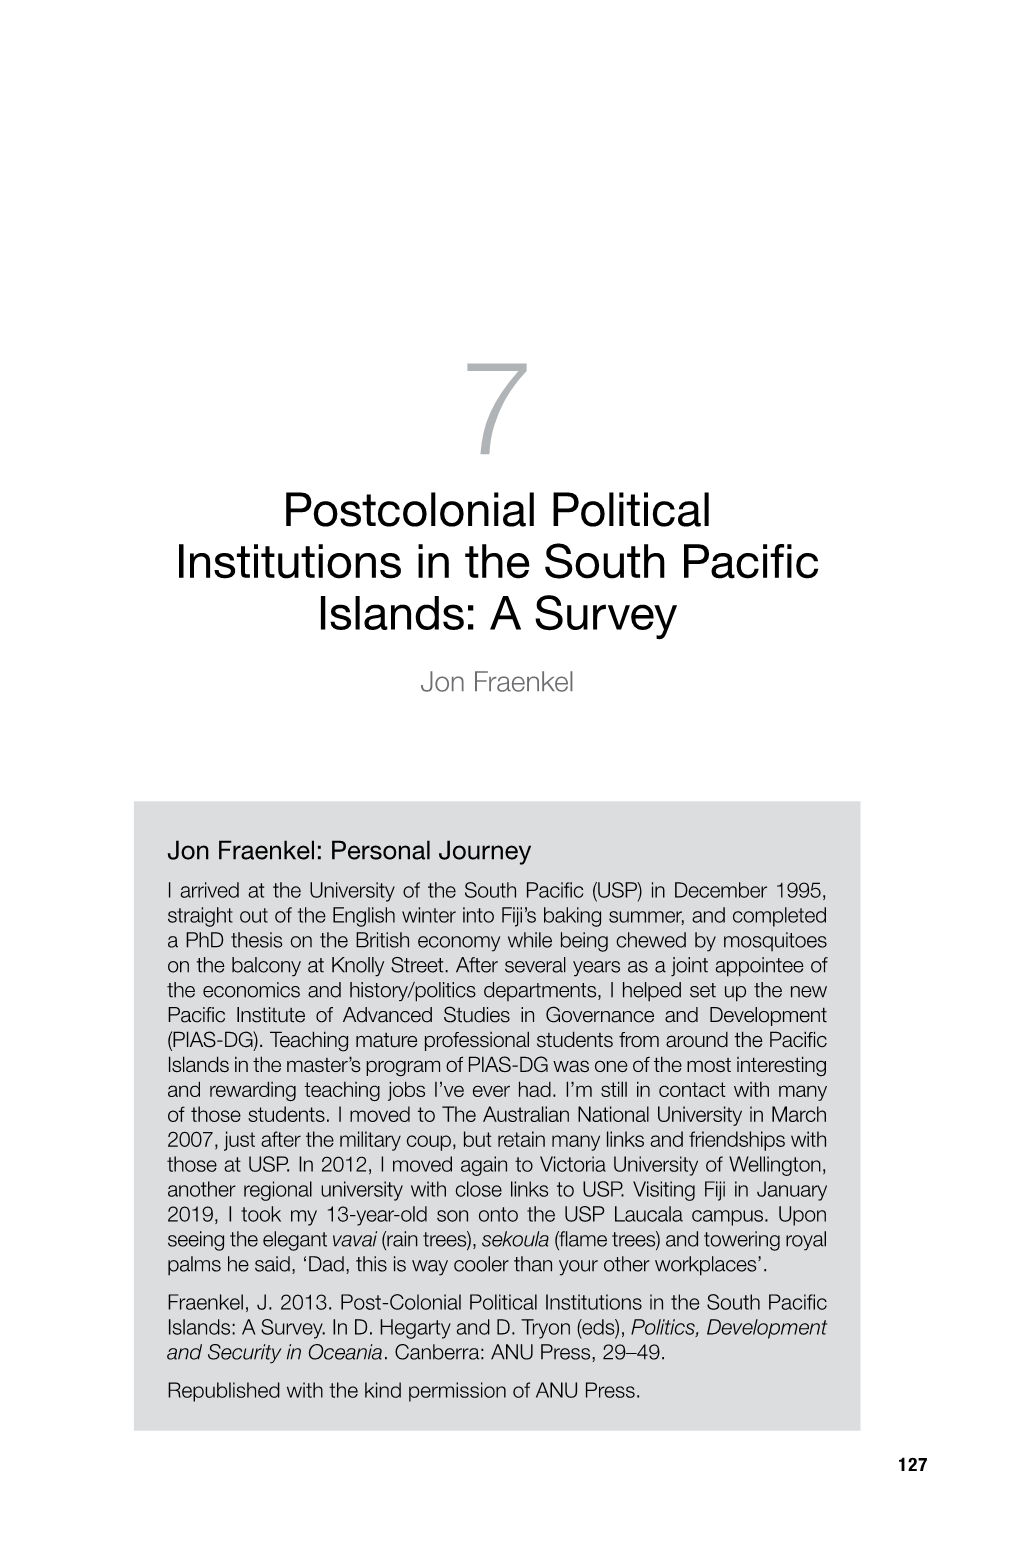 7. Postcolonial Political Institutions in the South Pacific Islands